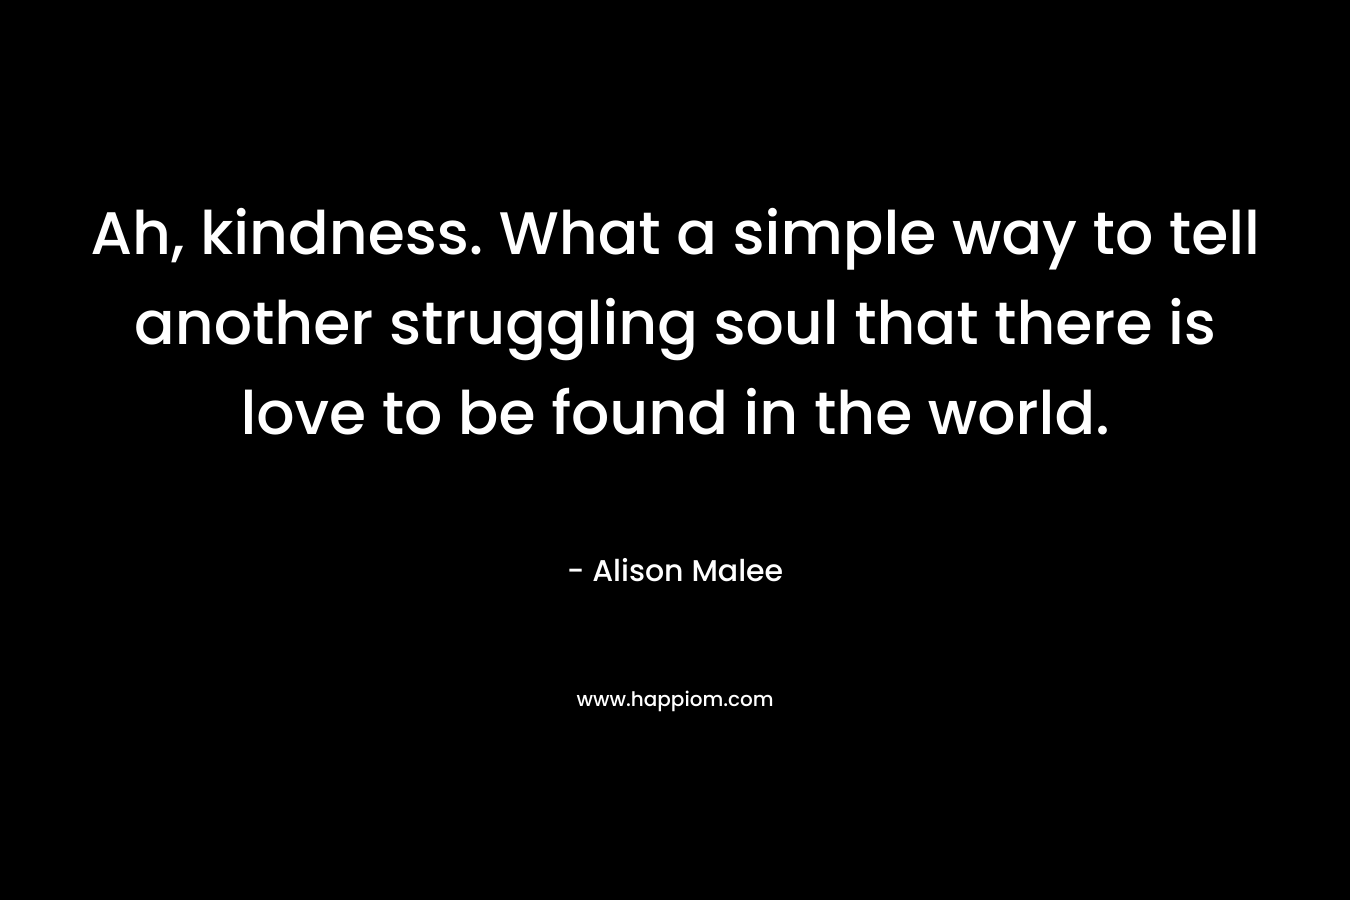 Ah, kindness. What a simple way to tell another struggling soul that there is love to be found in the world.